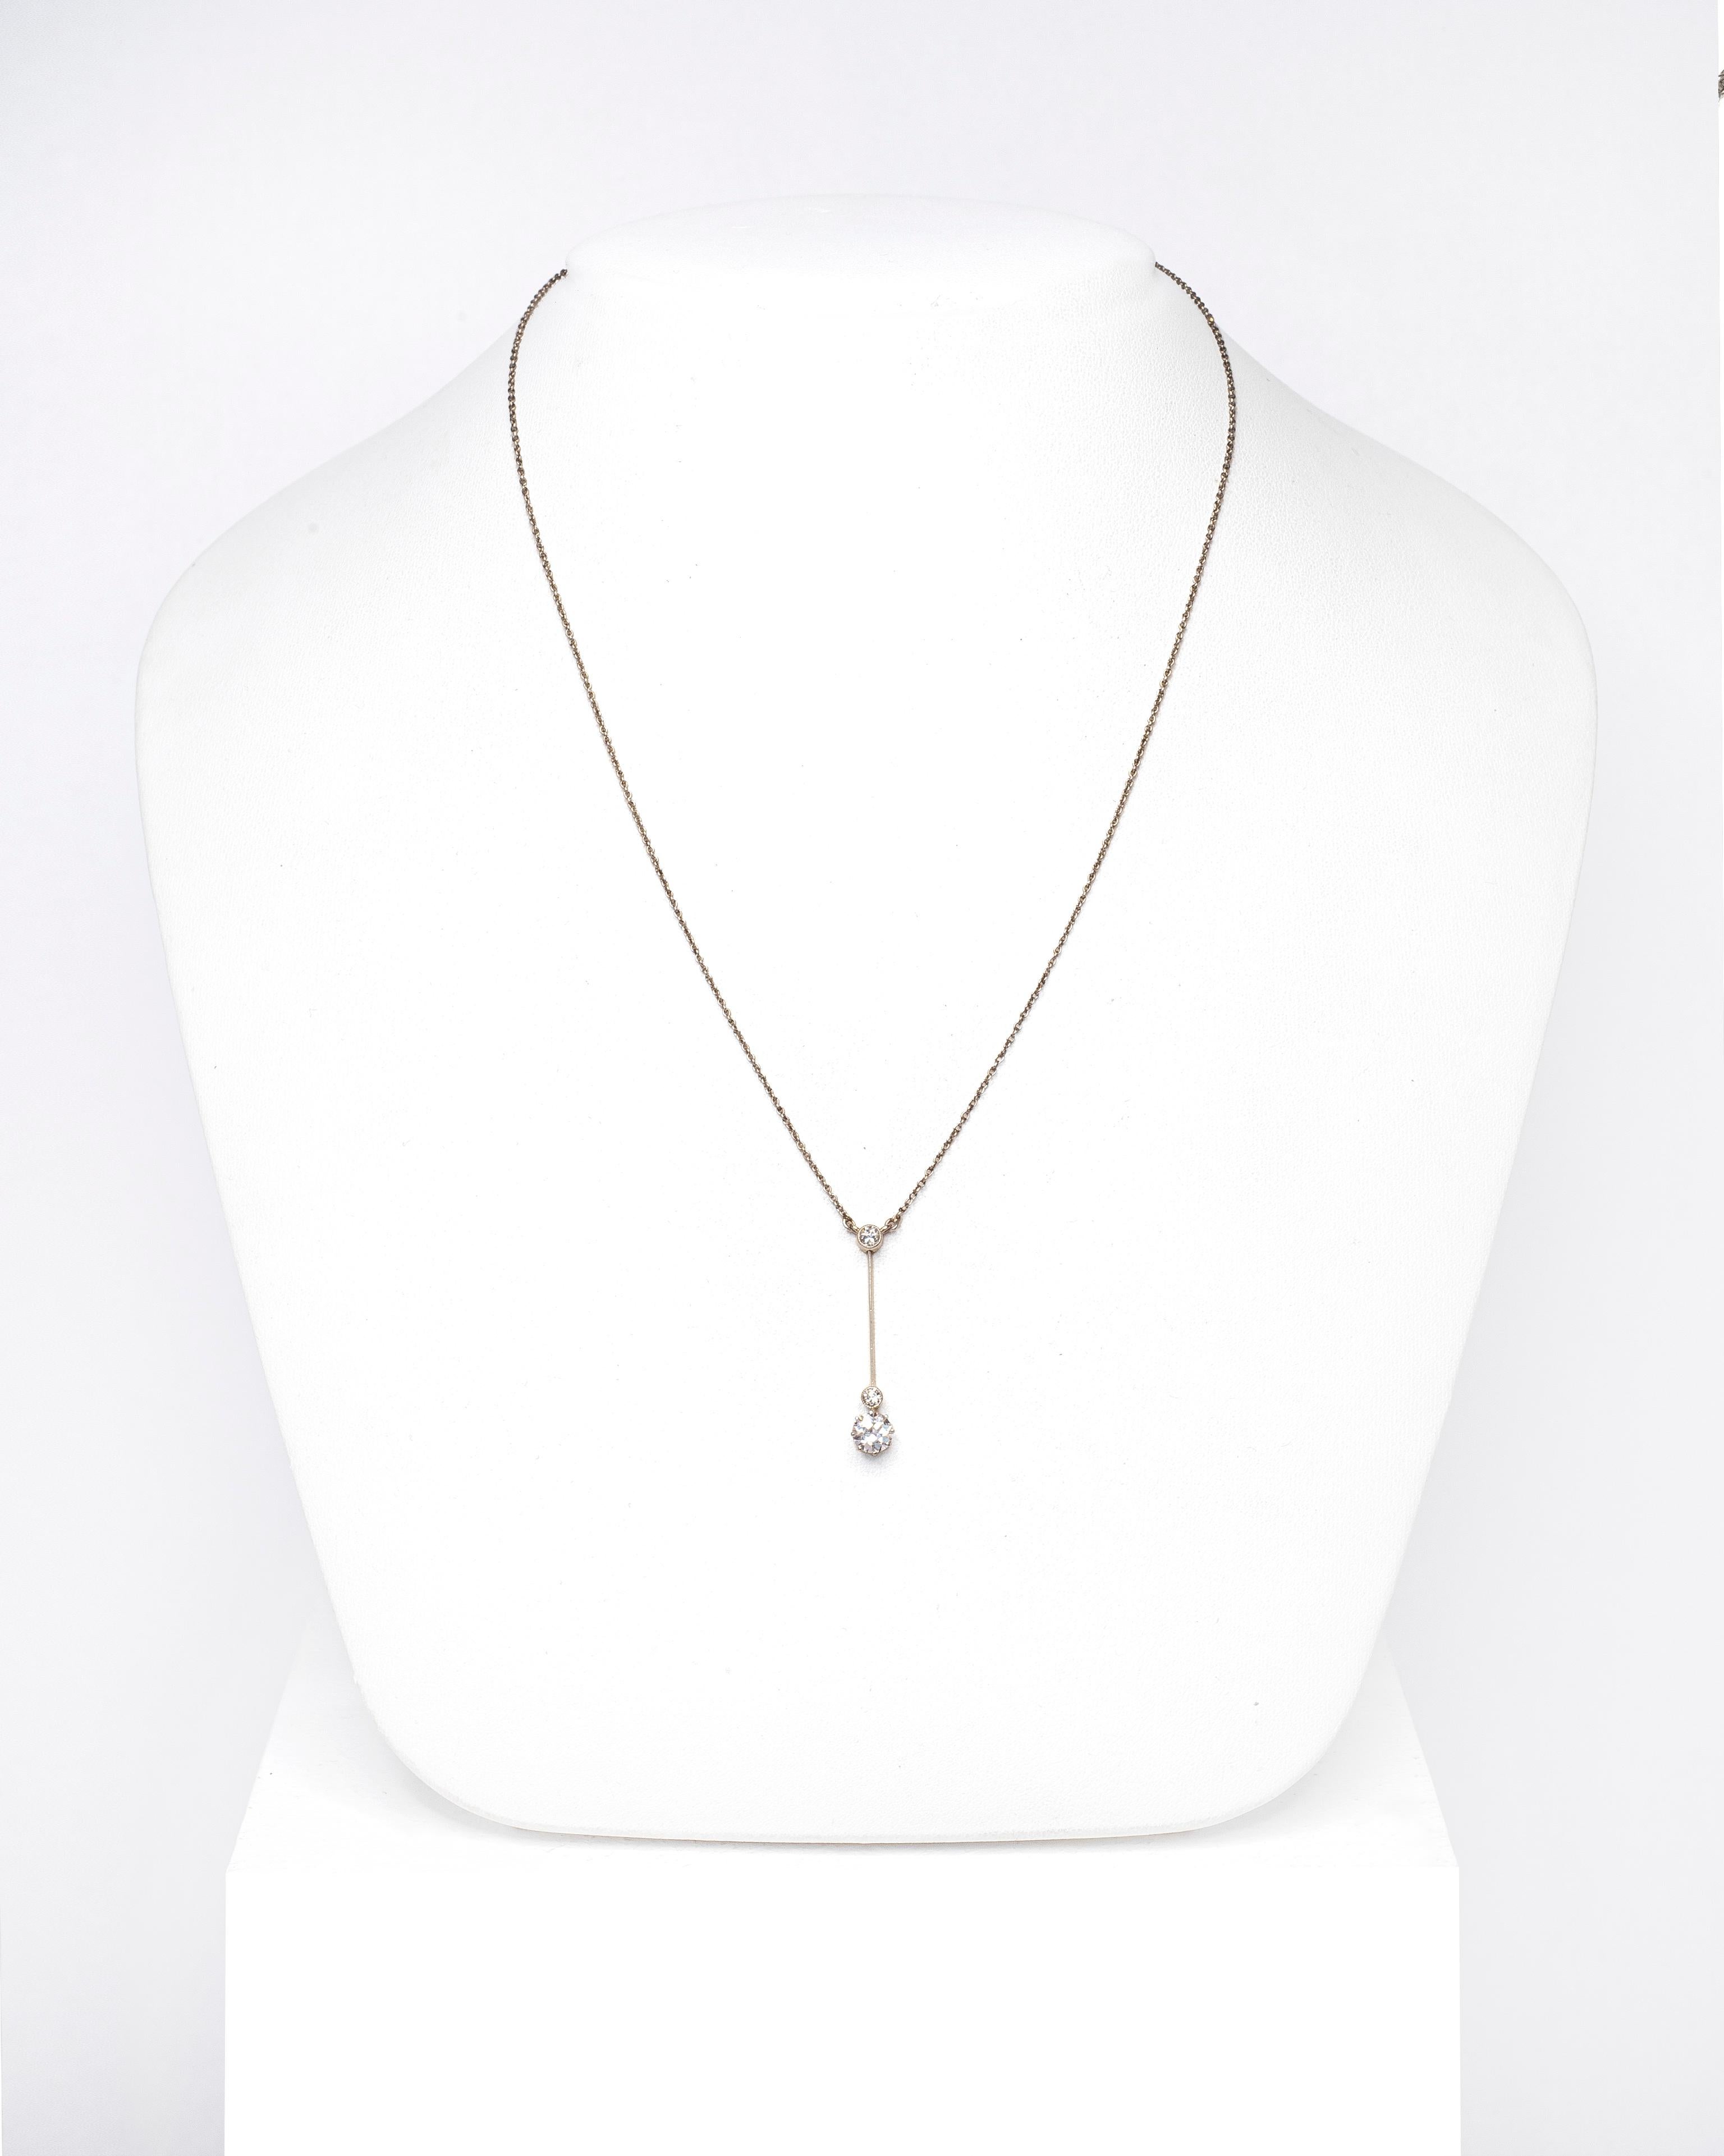 This necklace is nothing short of breathtaking. Three diamonds are set in a sleek and simplistic Art Deco design, crafted out of platinum on gold,  giving it a luxurious glow when it tilts and catches the light.

The largest diamond is fashioned in